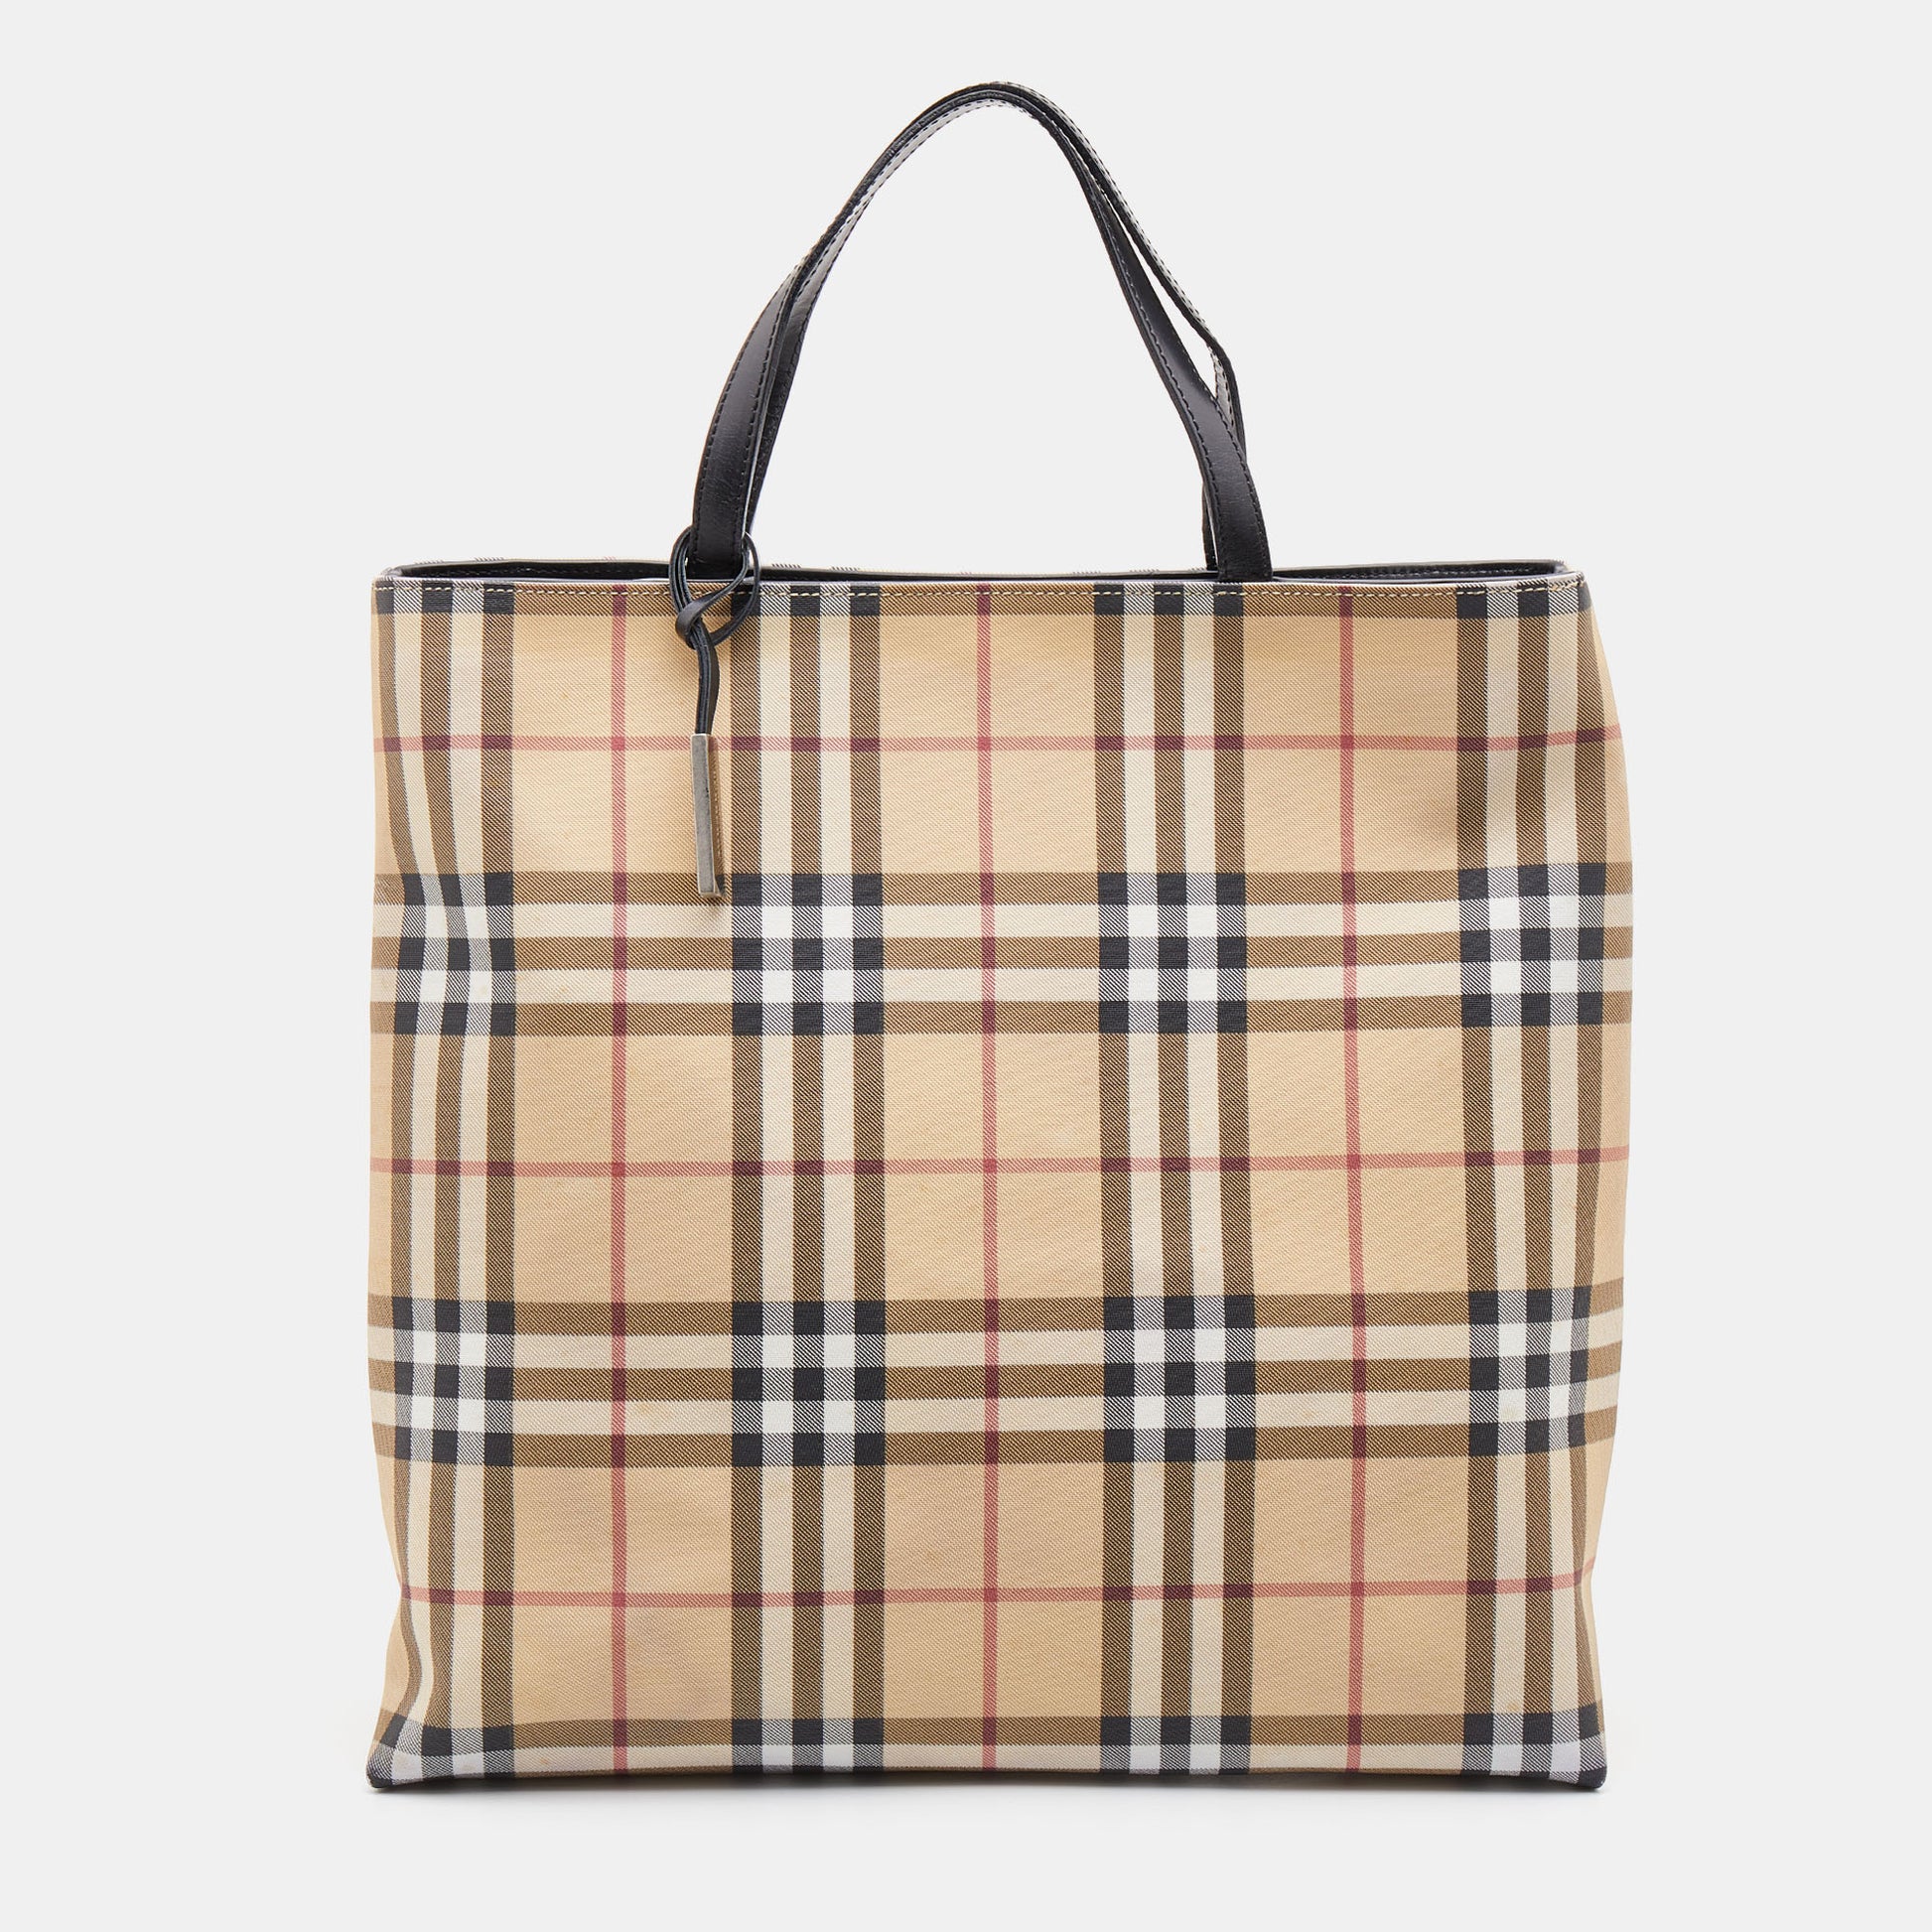 Burberry Beige/Black Nova Check Coated Canvas and Leather Shopper Tote